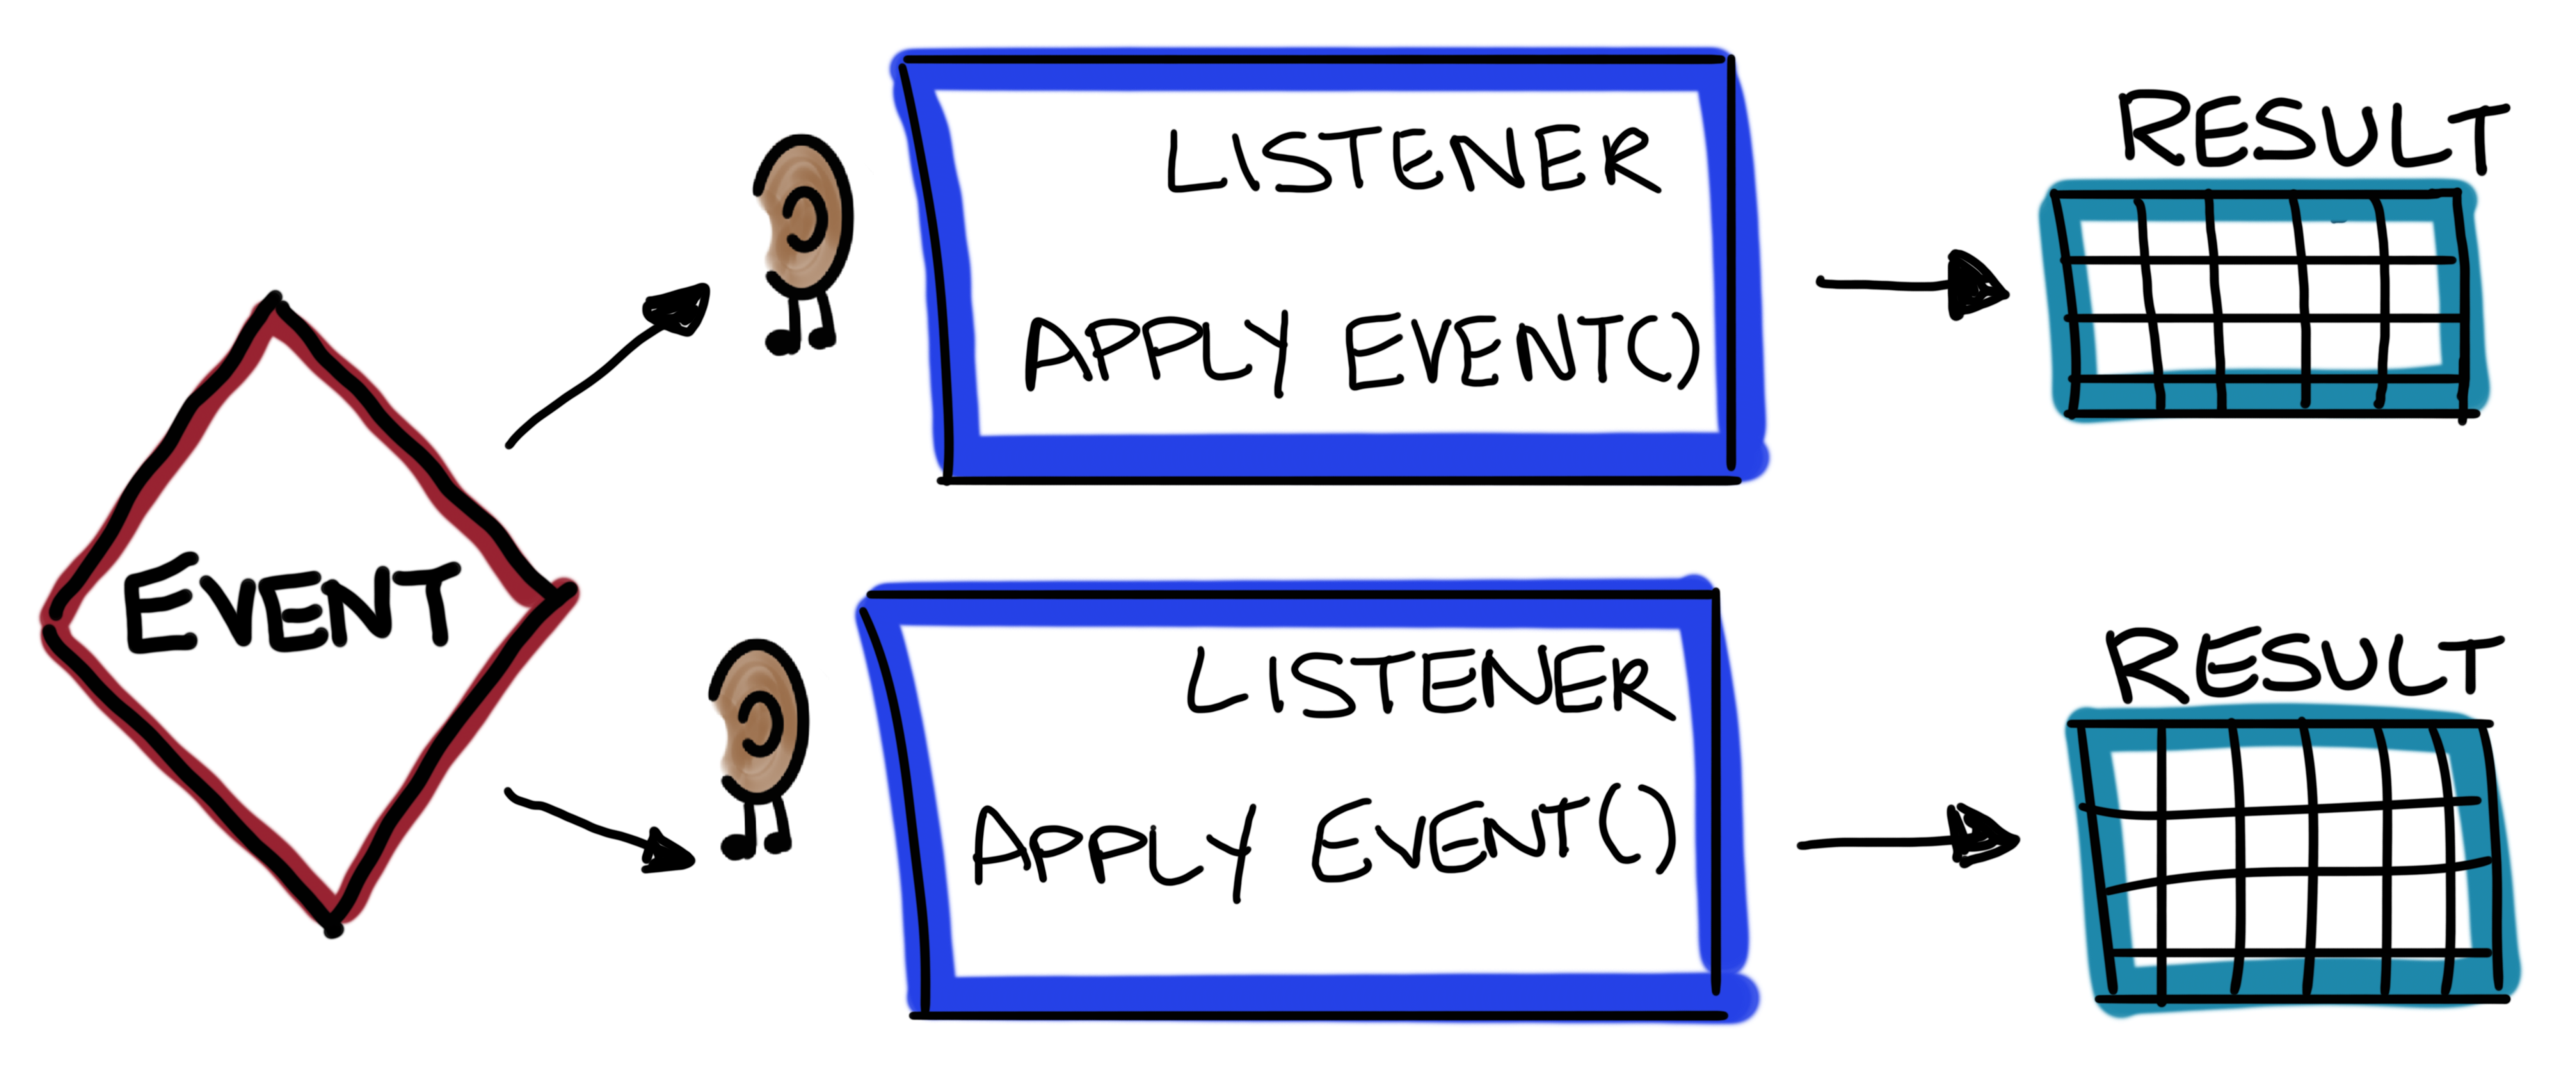 One event with two listeners handling the event differently